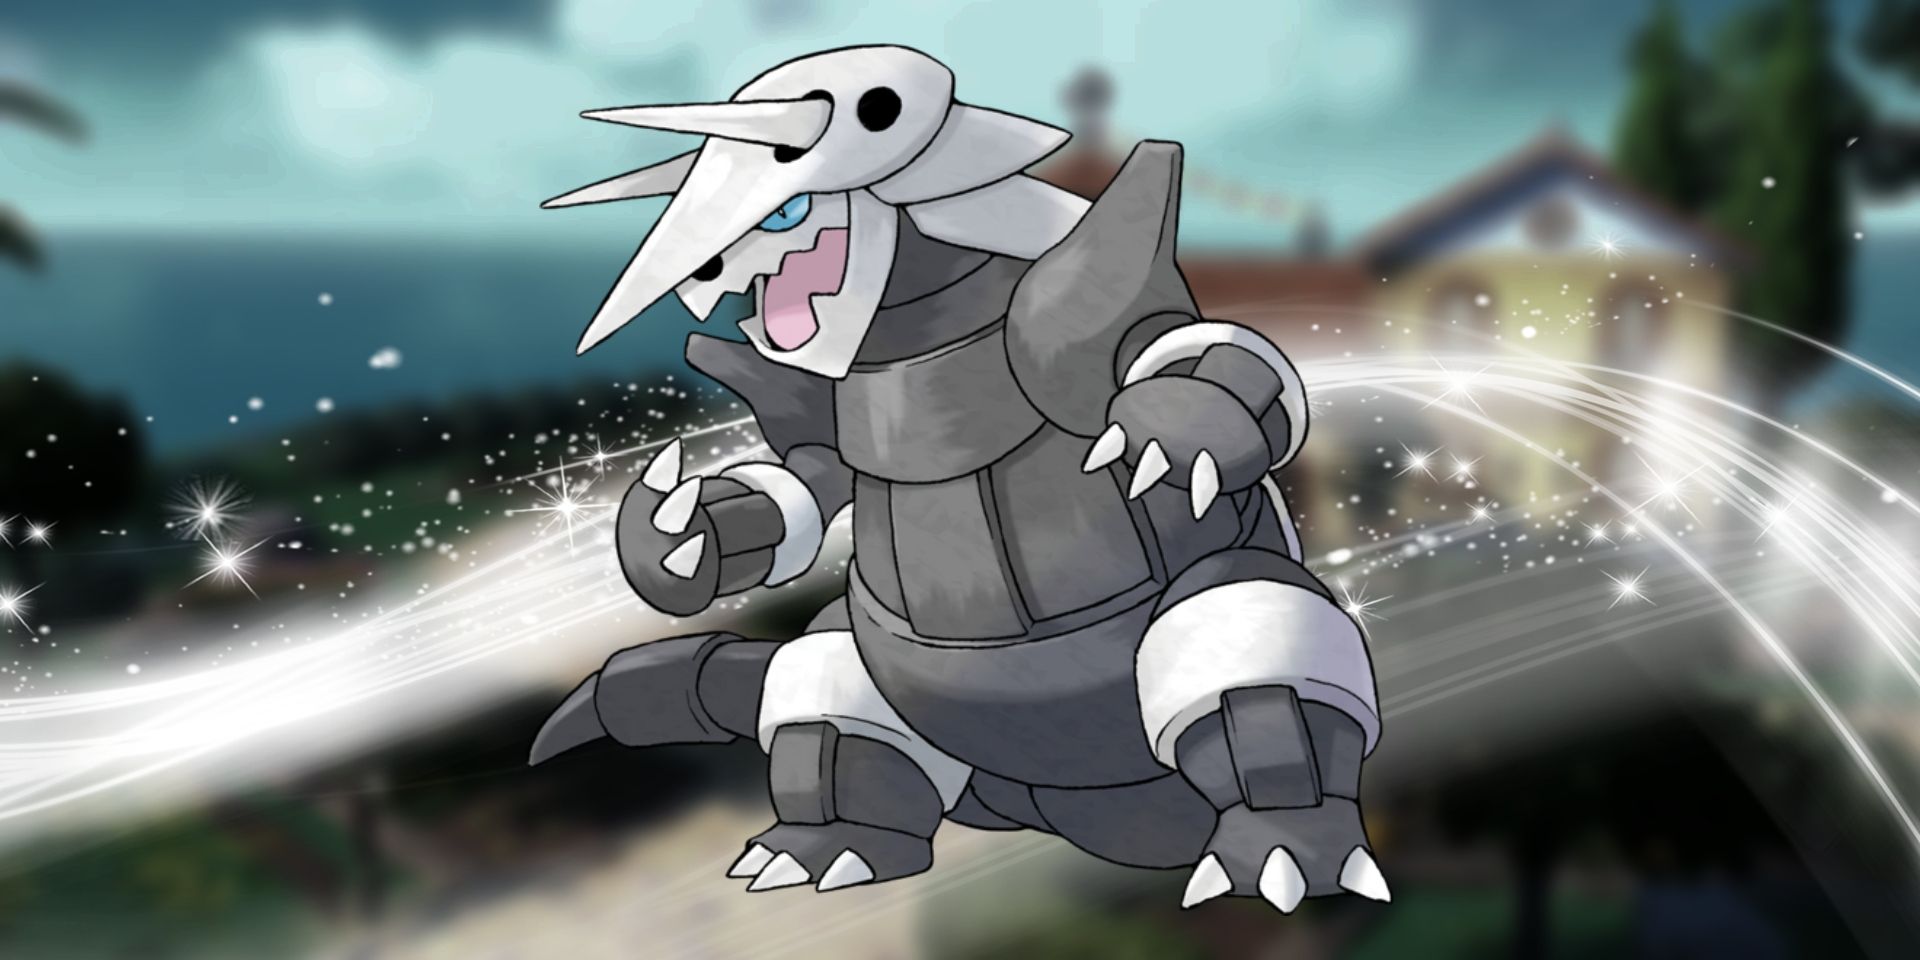 Pokemon's Aggron in the middle. Behind it is a white flowing and sparkling effect.